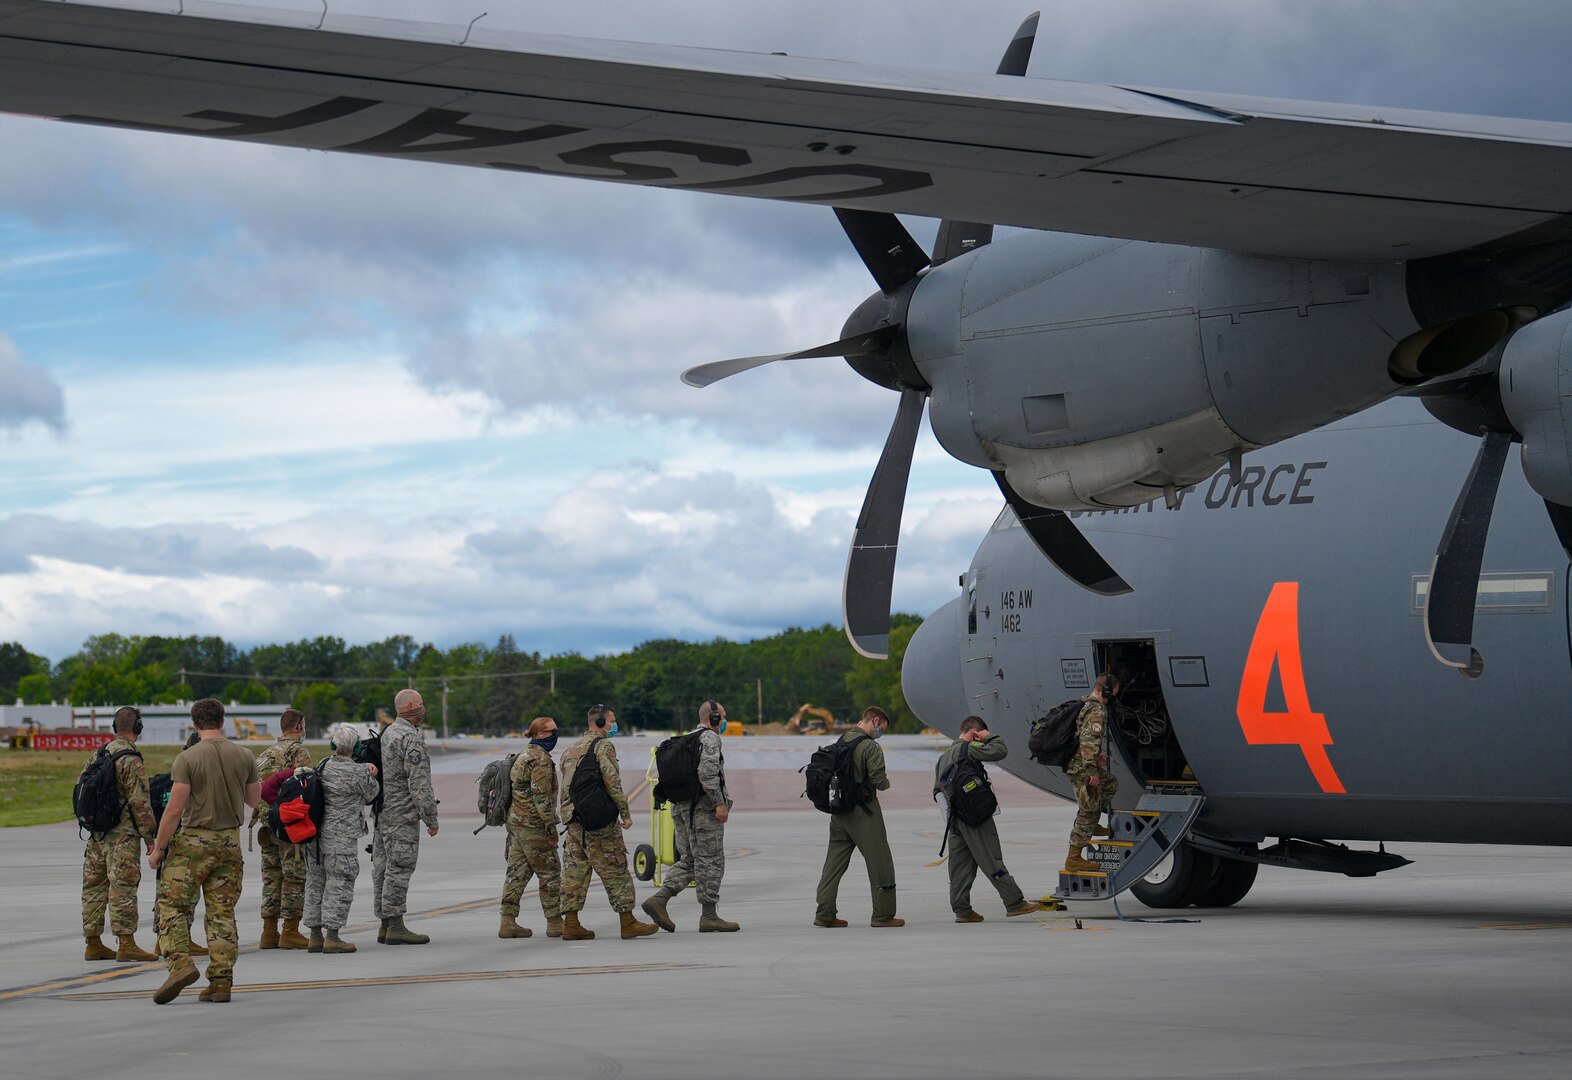 Airmen assigned to the 158th Fighter Wing, Vermont Air National Guard, deploy to Volk Field, Wisconsin, for Operation Northern Lightning, Vermont Air National Guard Base, South Burlington, Vt., Aug. 3, 2020. A C-130 assigned to the 146th Airlift Wing, Channel Islands Air National Guard Station, California Air National Guard, flew the Green Mountain Boys to partake in a two-week exercise where they will train on combat operations involving the F-35A Lightning II.